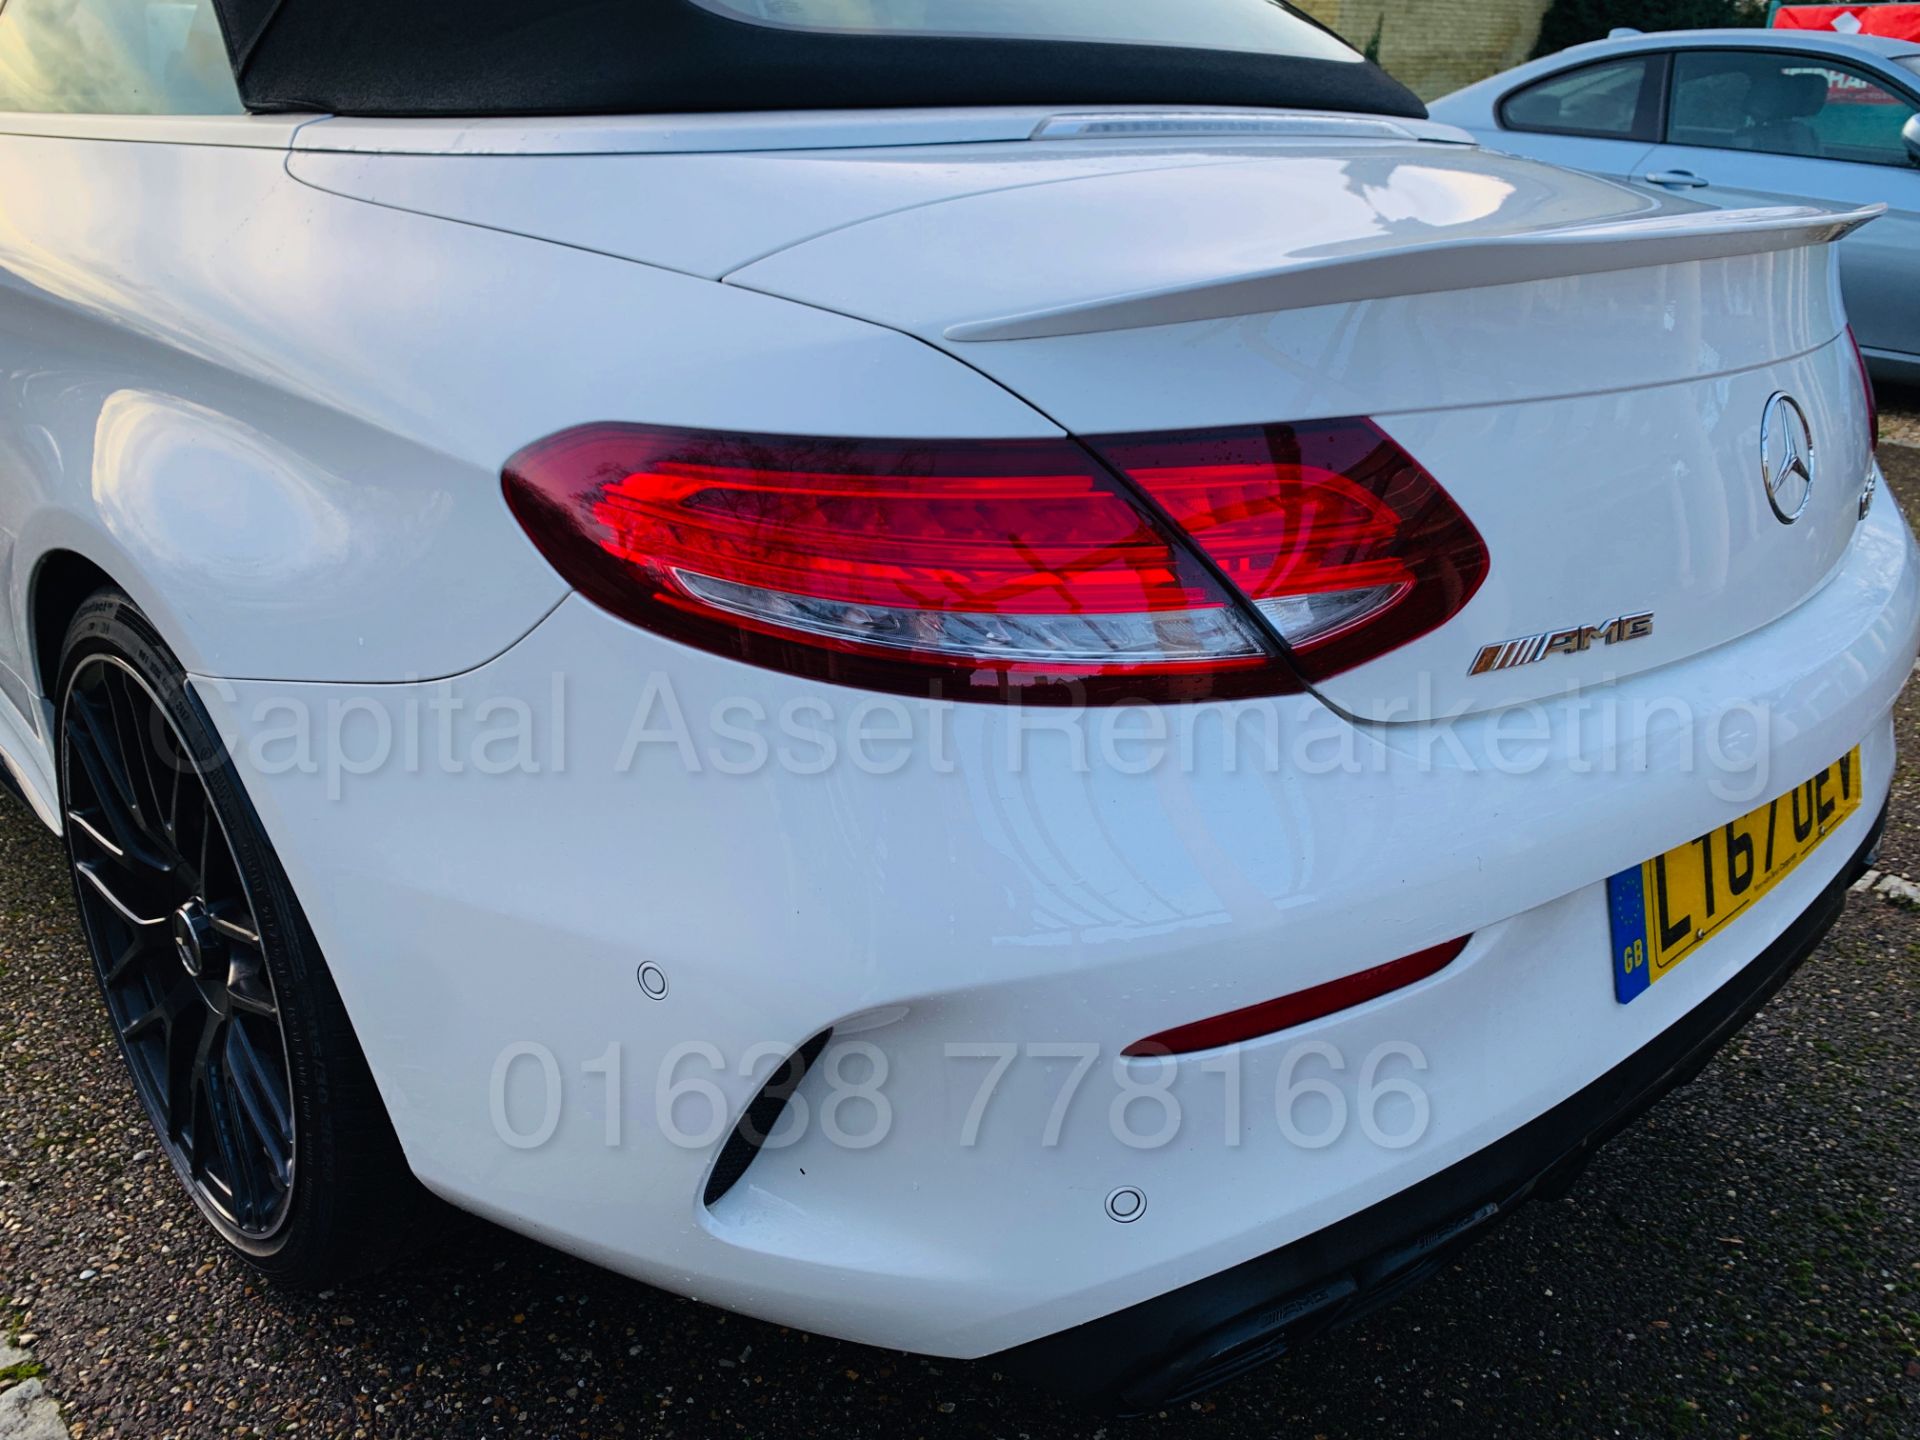 (On Sale) MERCEDES-BENZ AMG C63-S *CABRIOLET* (67 REG) '4.0 BI-TURBO -510 BHP - AUTO' *FULLY LOADED* - Image 28 of 79